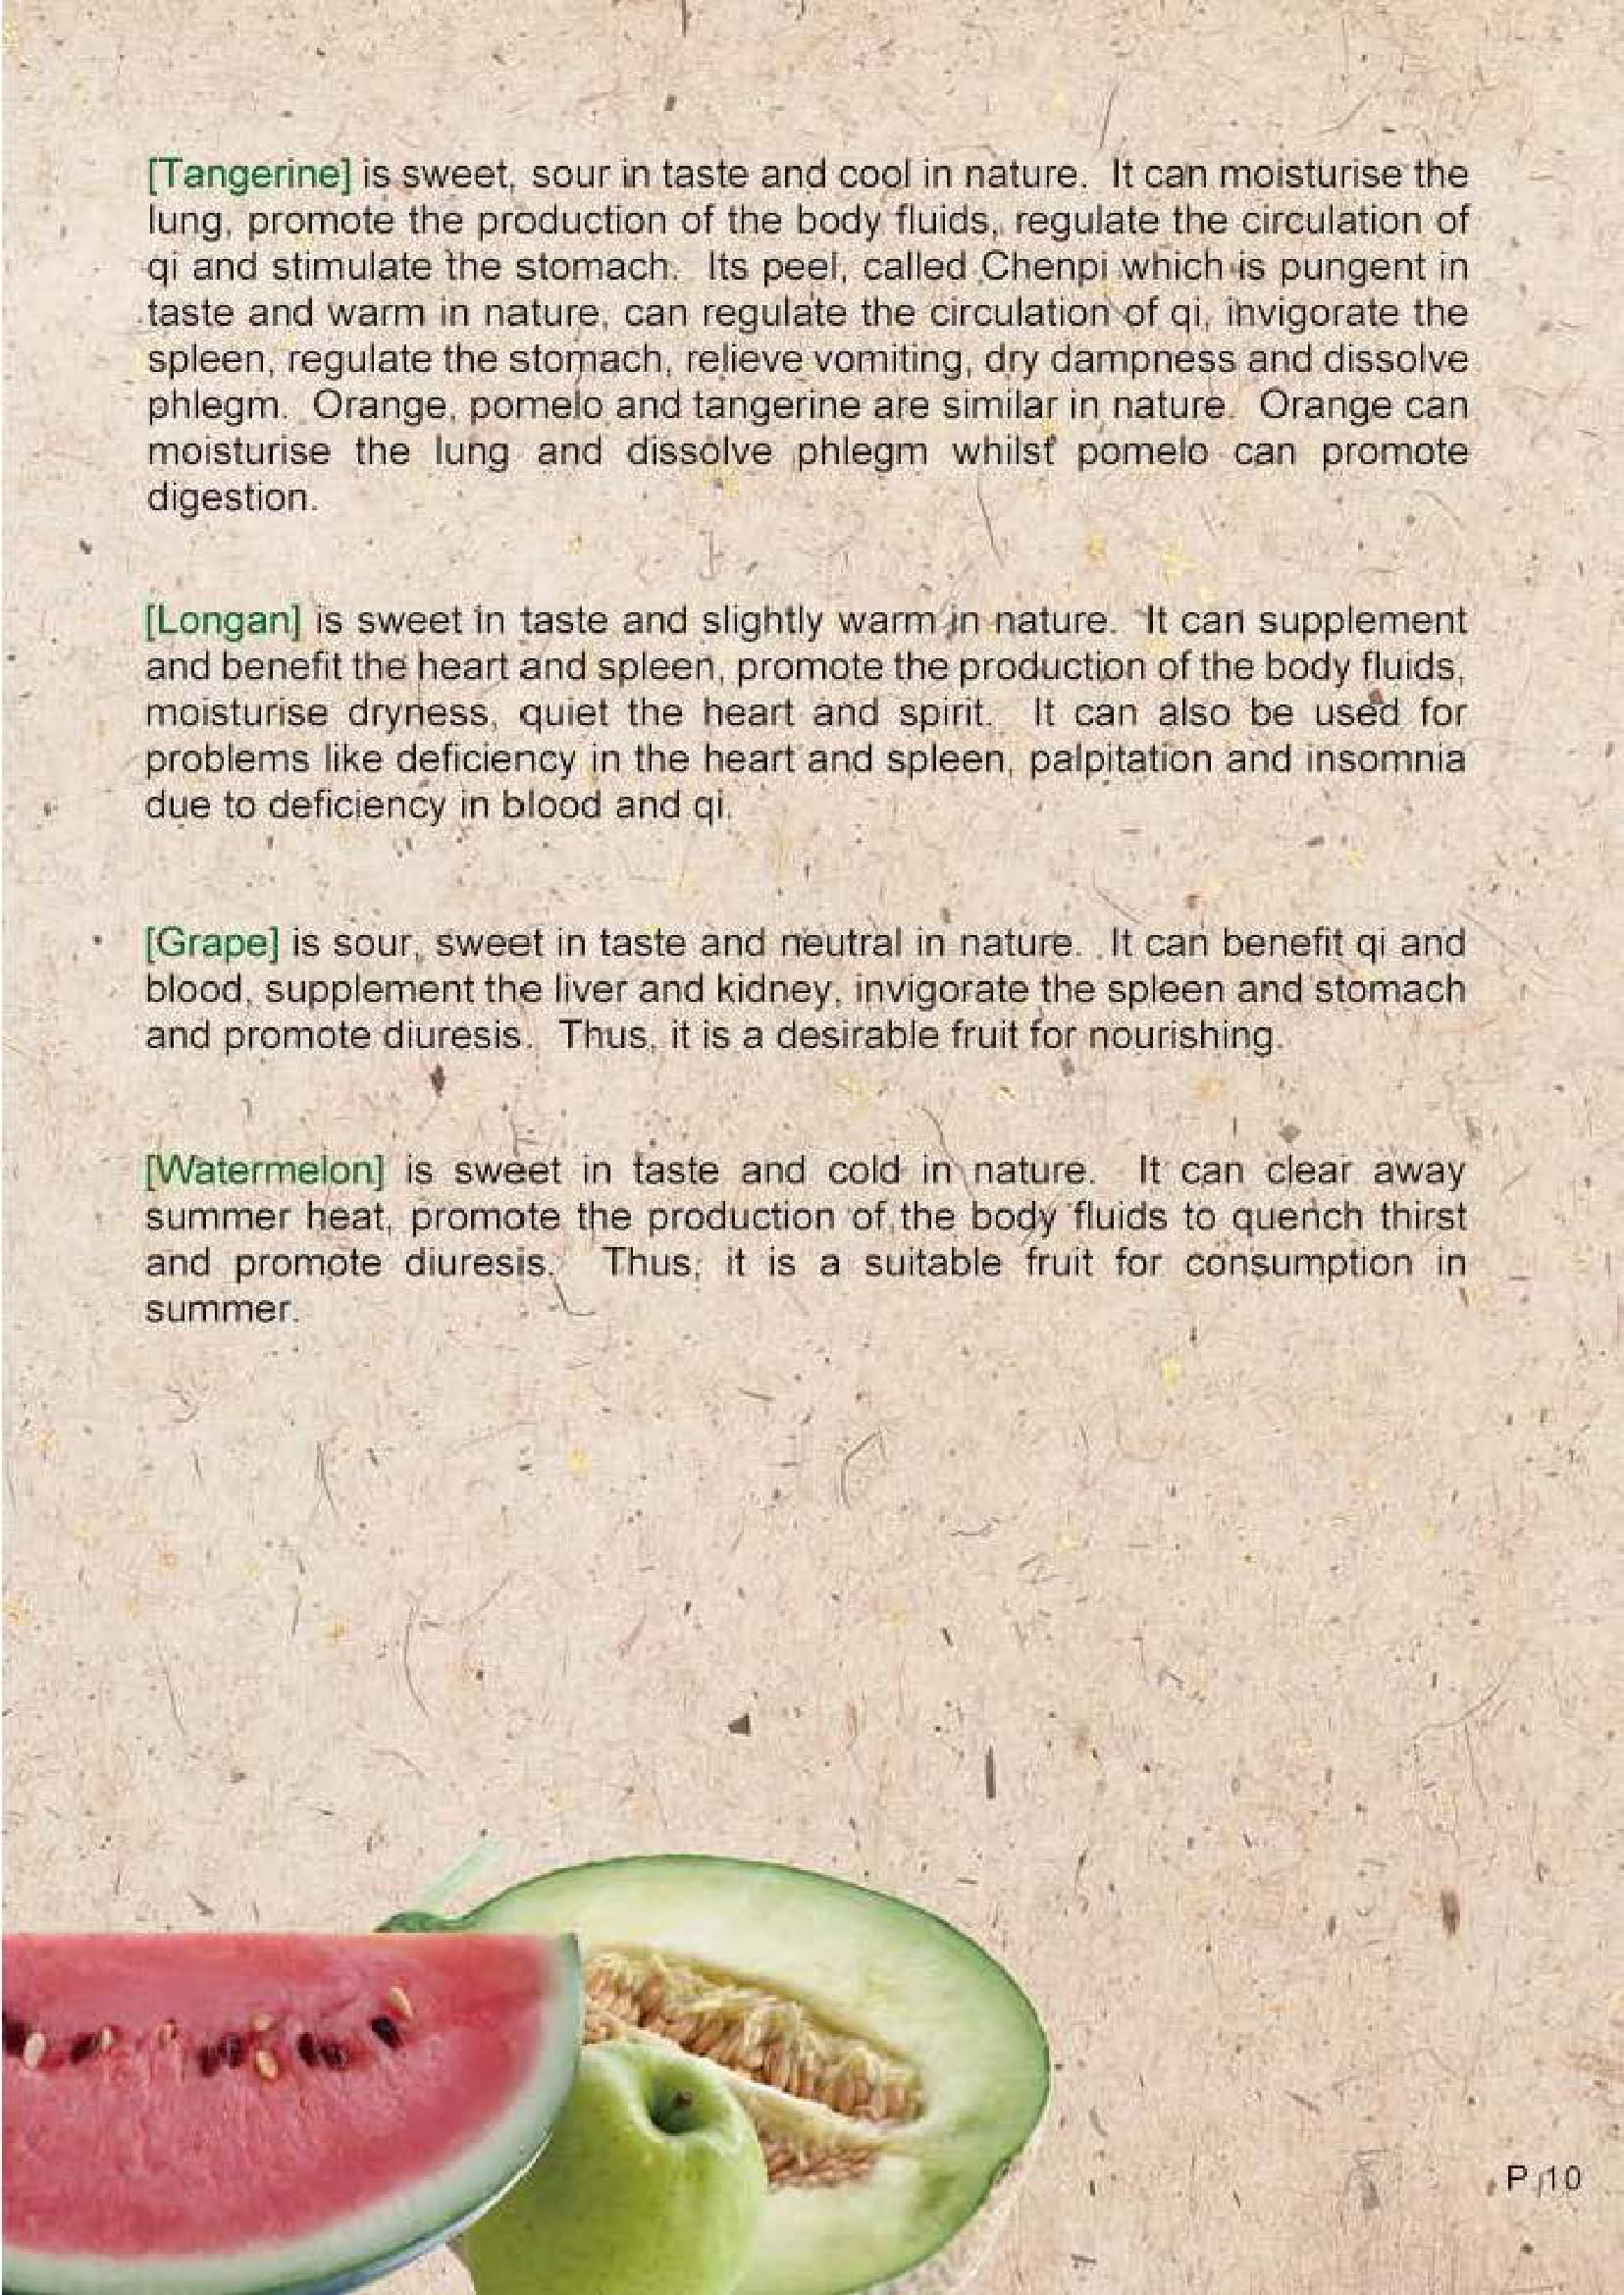 This picture demonstrates page 10 of the publication entitled "Health preservation by food in Chinese medicine – The five cereals, fruits and vegetables"